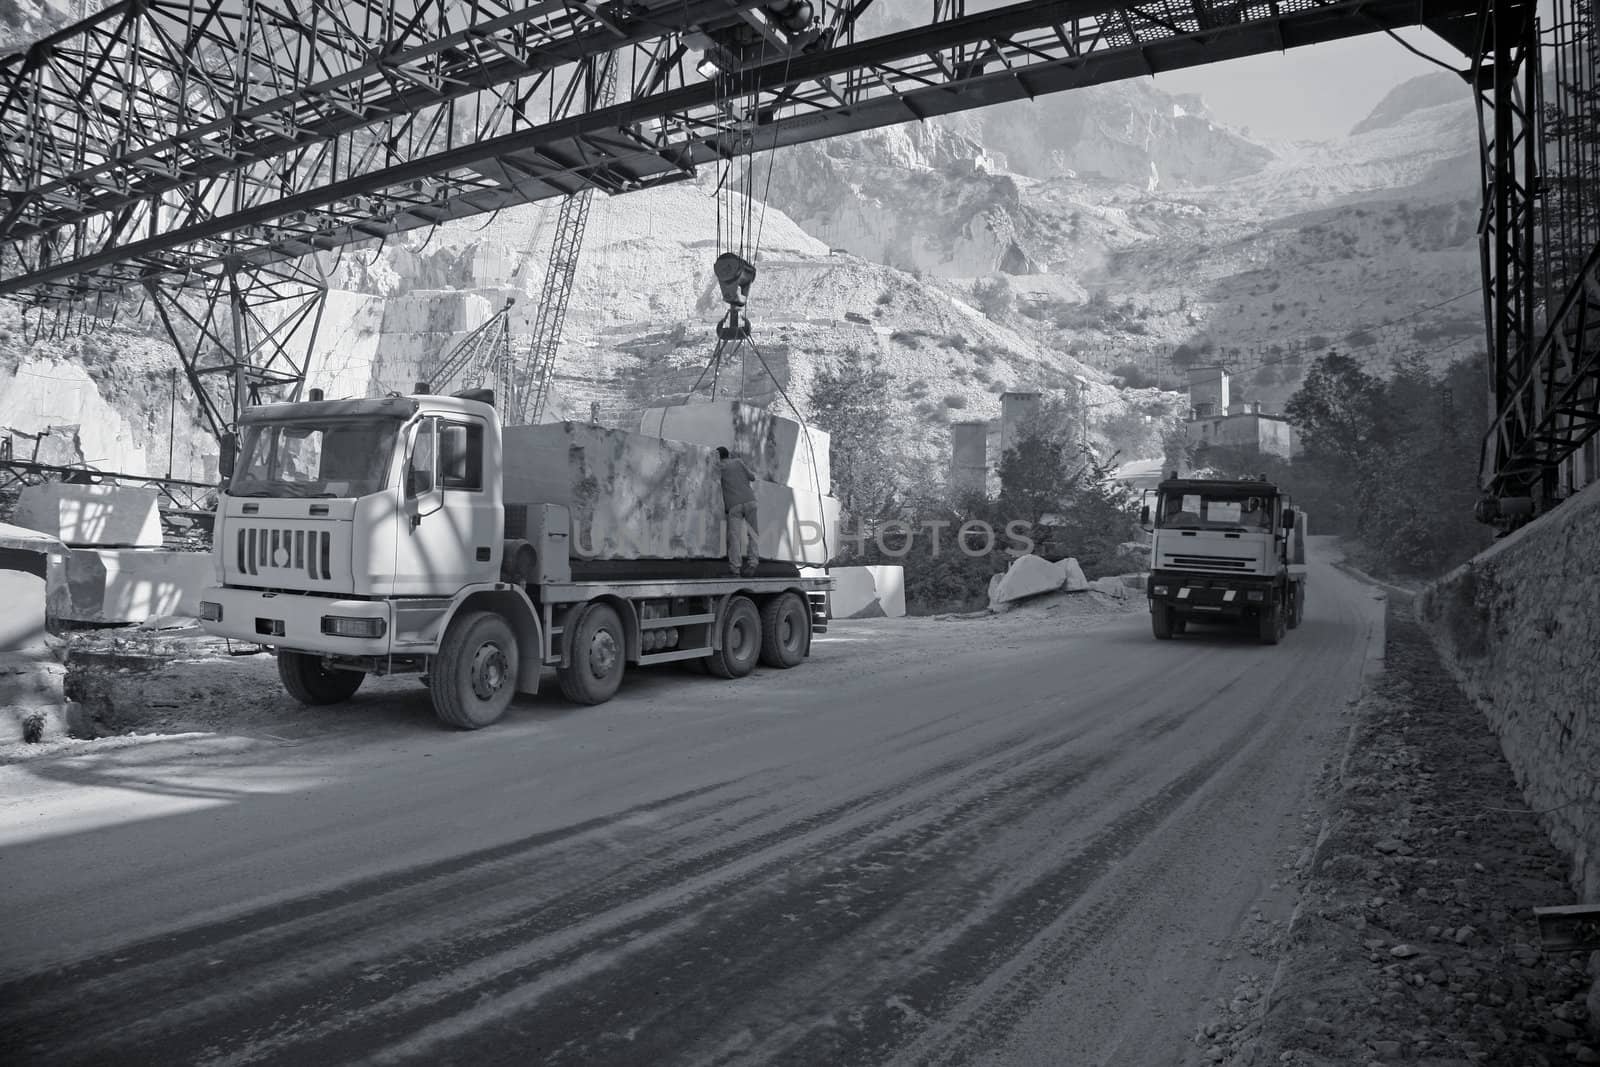 Marble quarry in the mountains near Carrara - Tuscany - Italy. A lorry is being loaded with big blocks of marble for transport whie another one is passing.